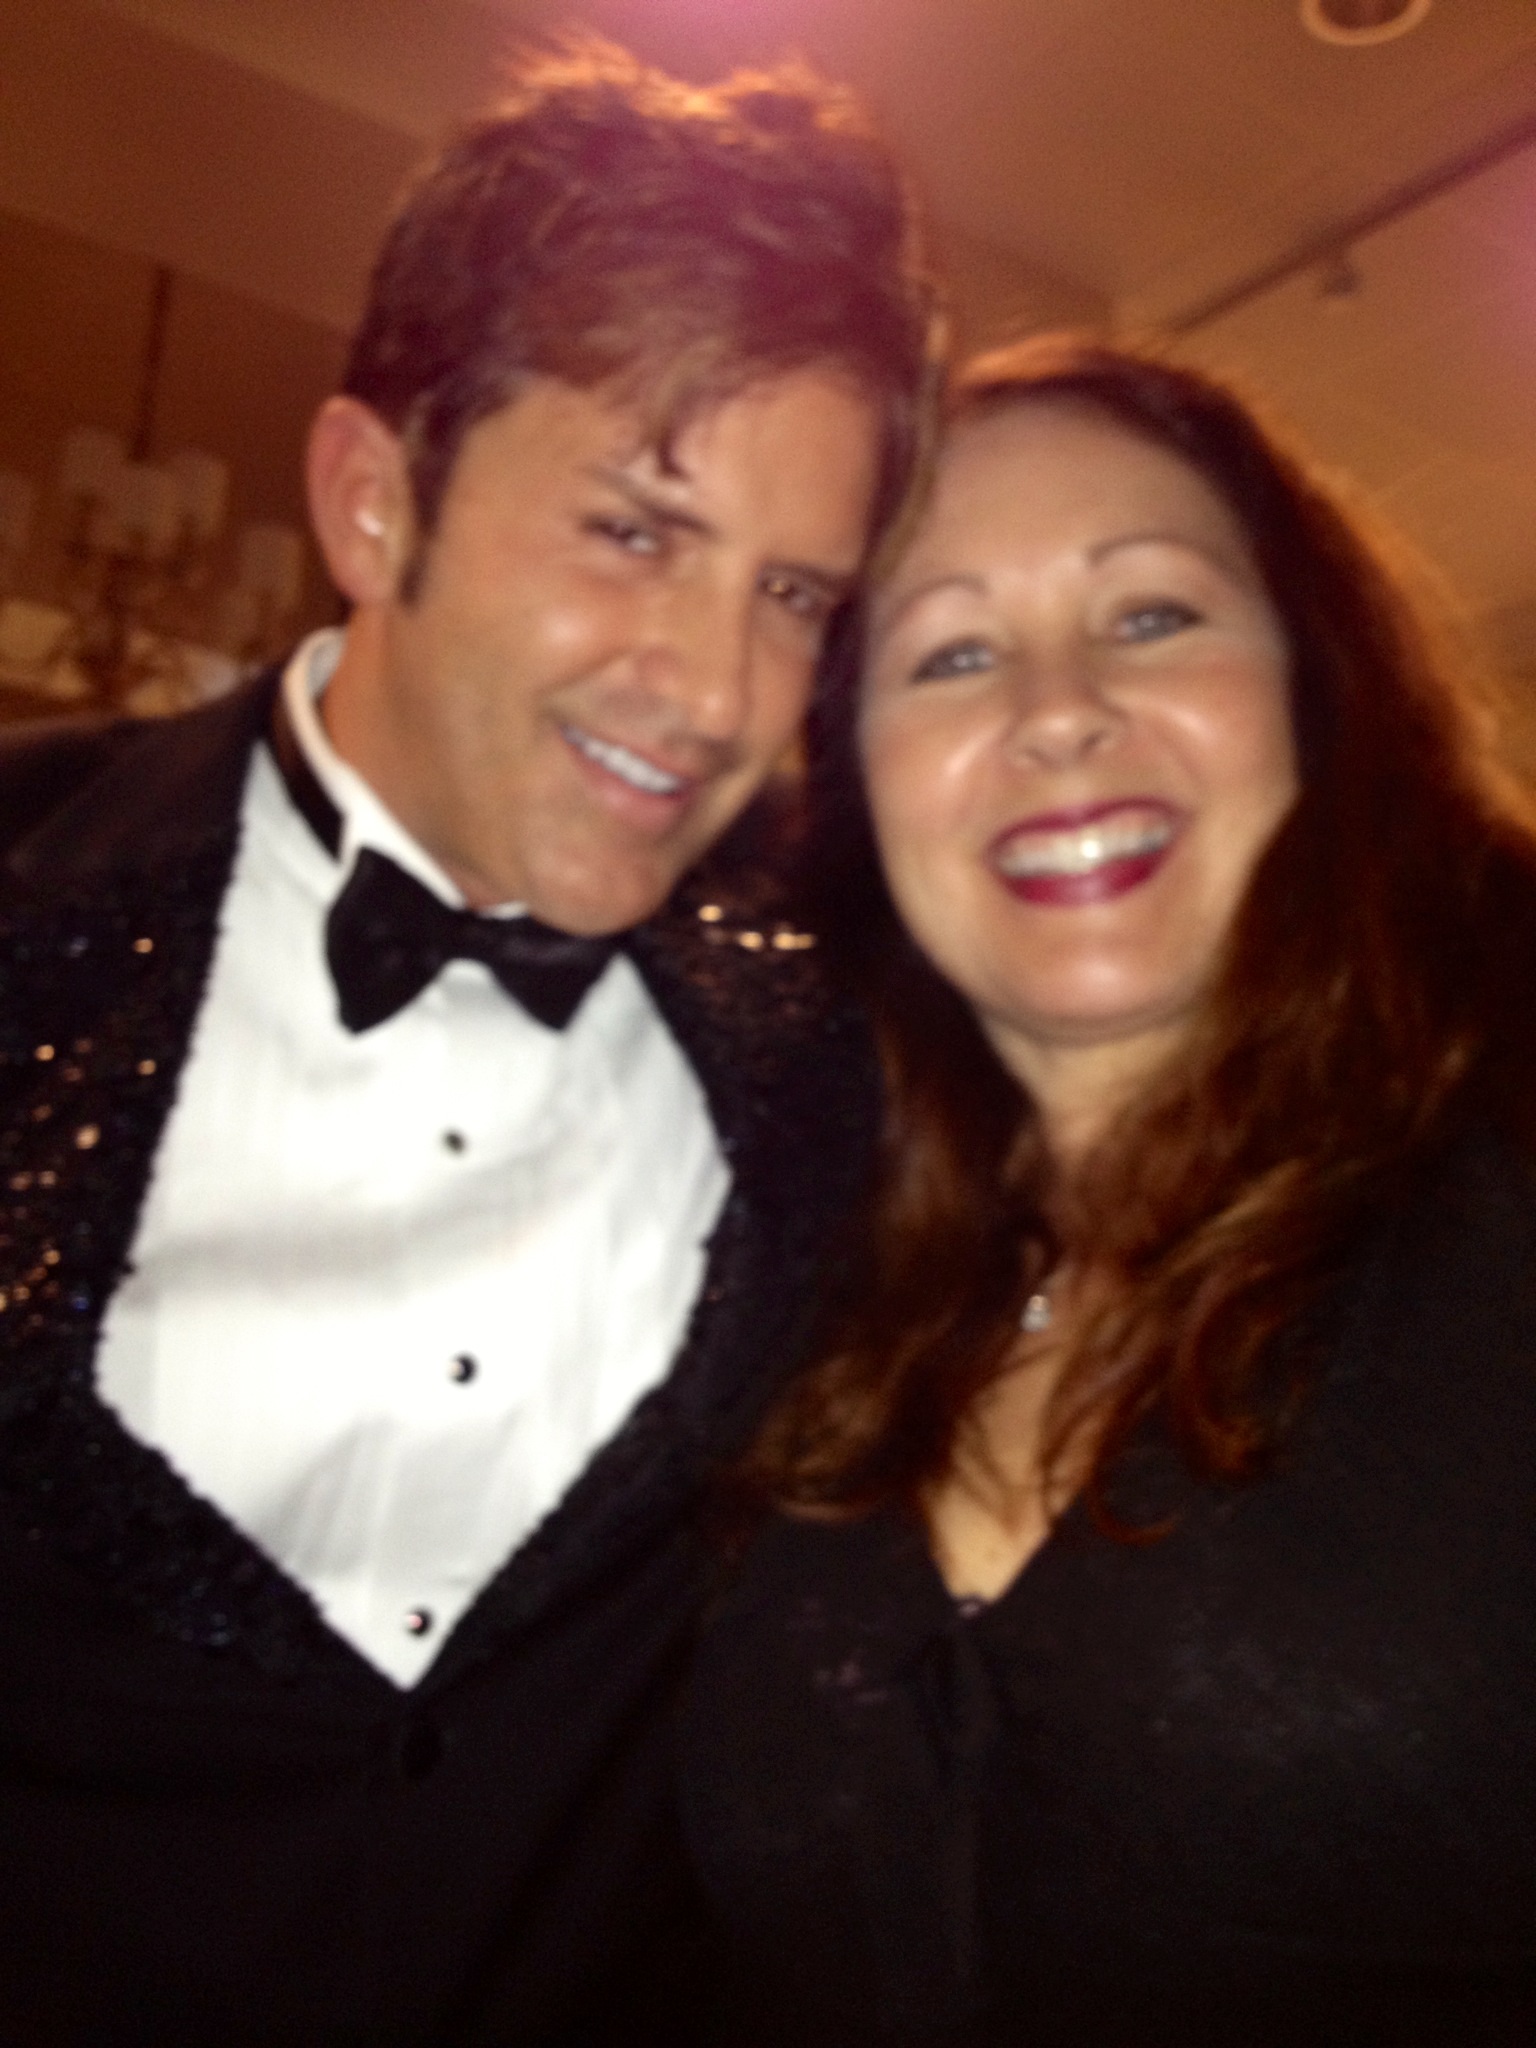 At MIHM 3rd Anniversary Gala - with Dr. 90210 (Dr. Robert M. Rey of Beverly Hills)